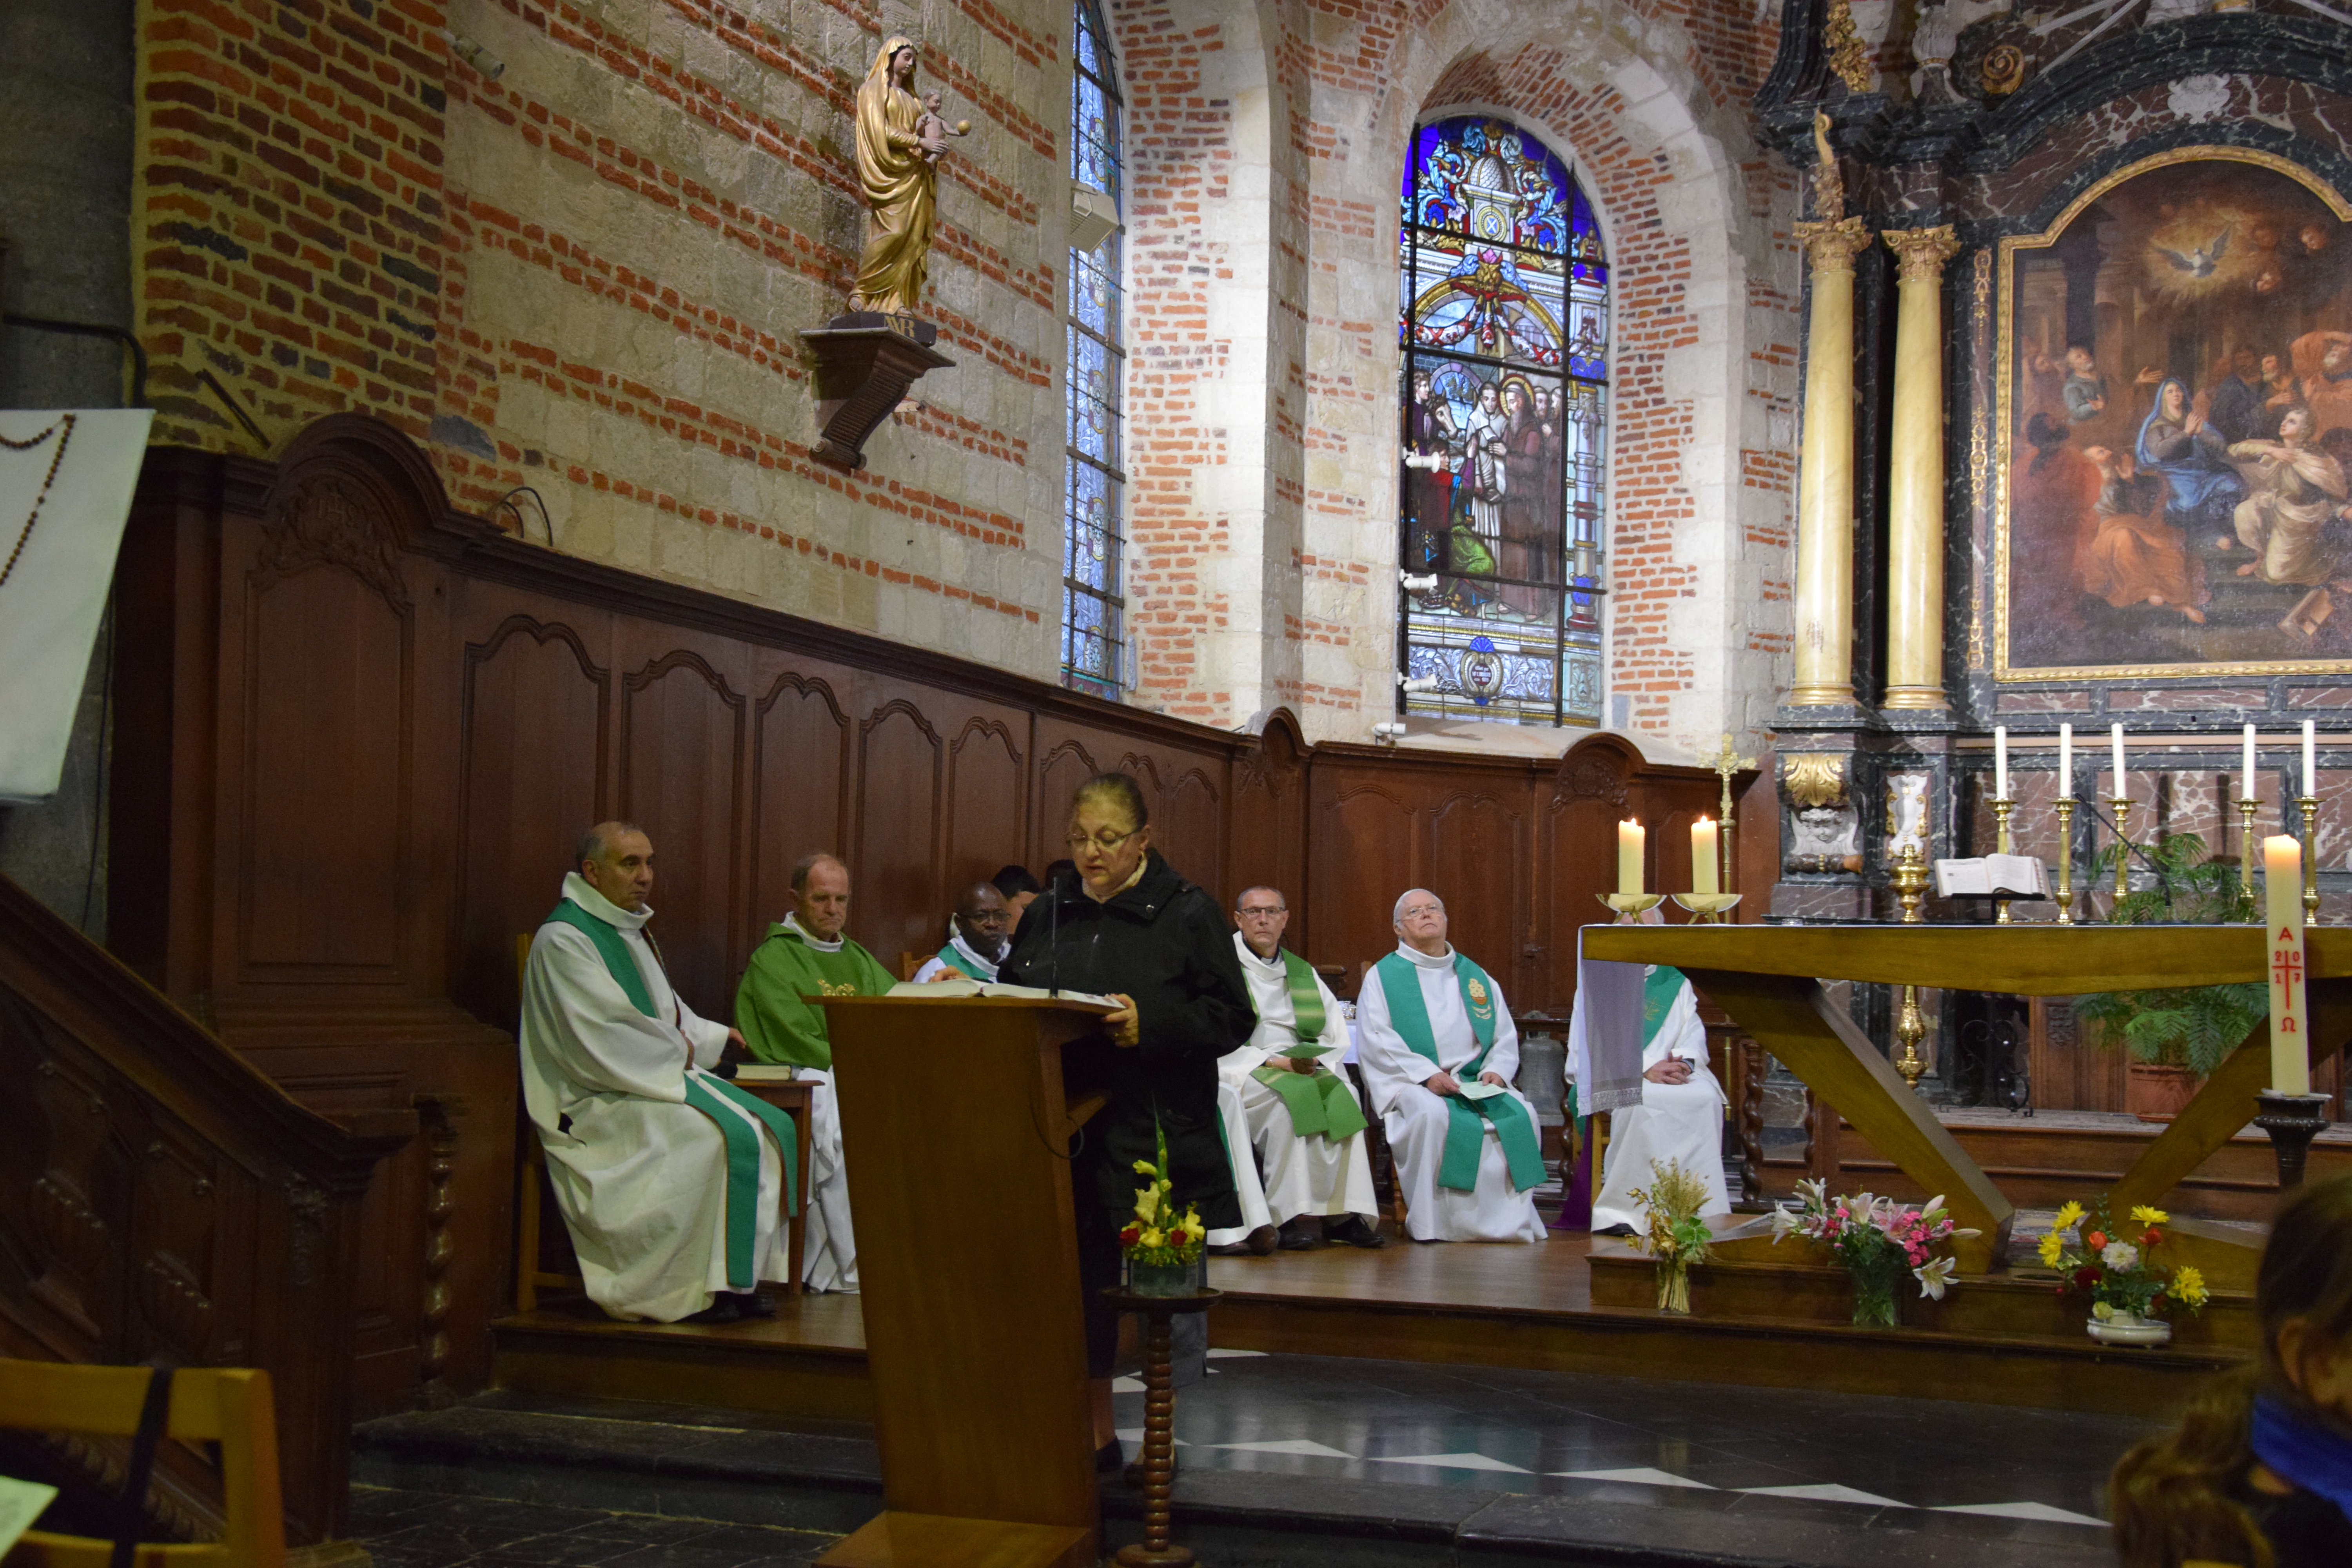 Rentree doyenne Marches Hainaut 2017 messe 4